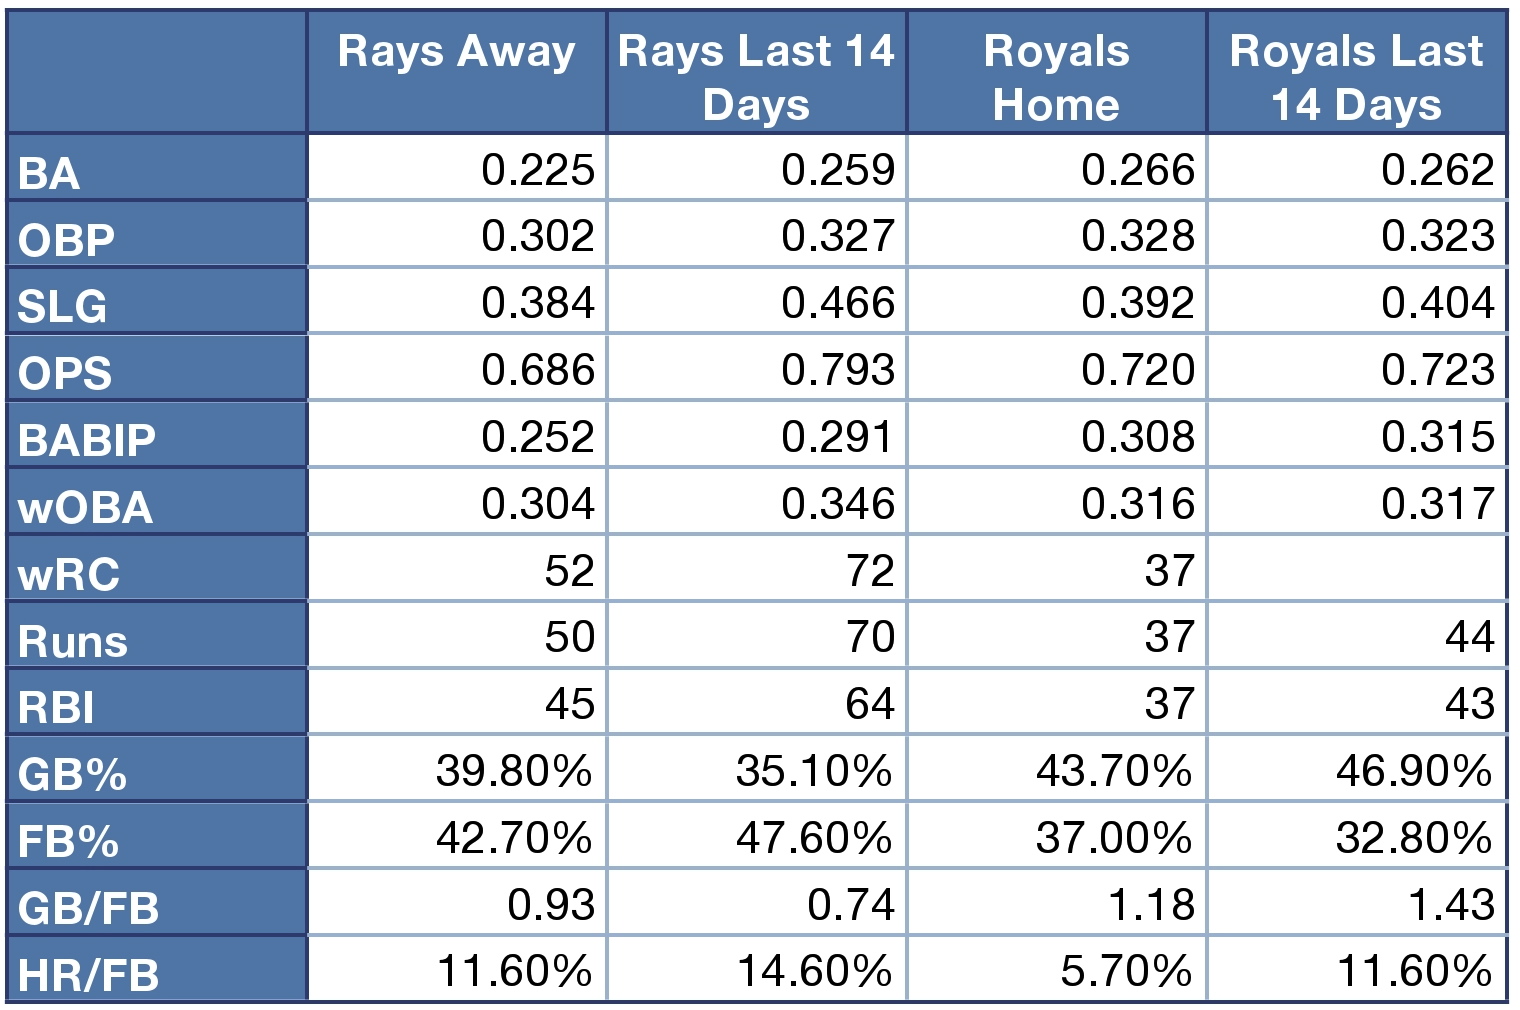 Rays and Royals offensive production at home, away, and over the last 14 days